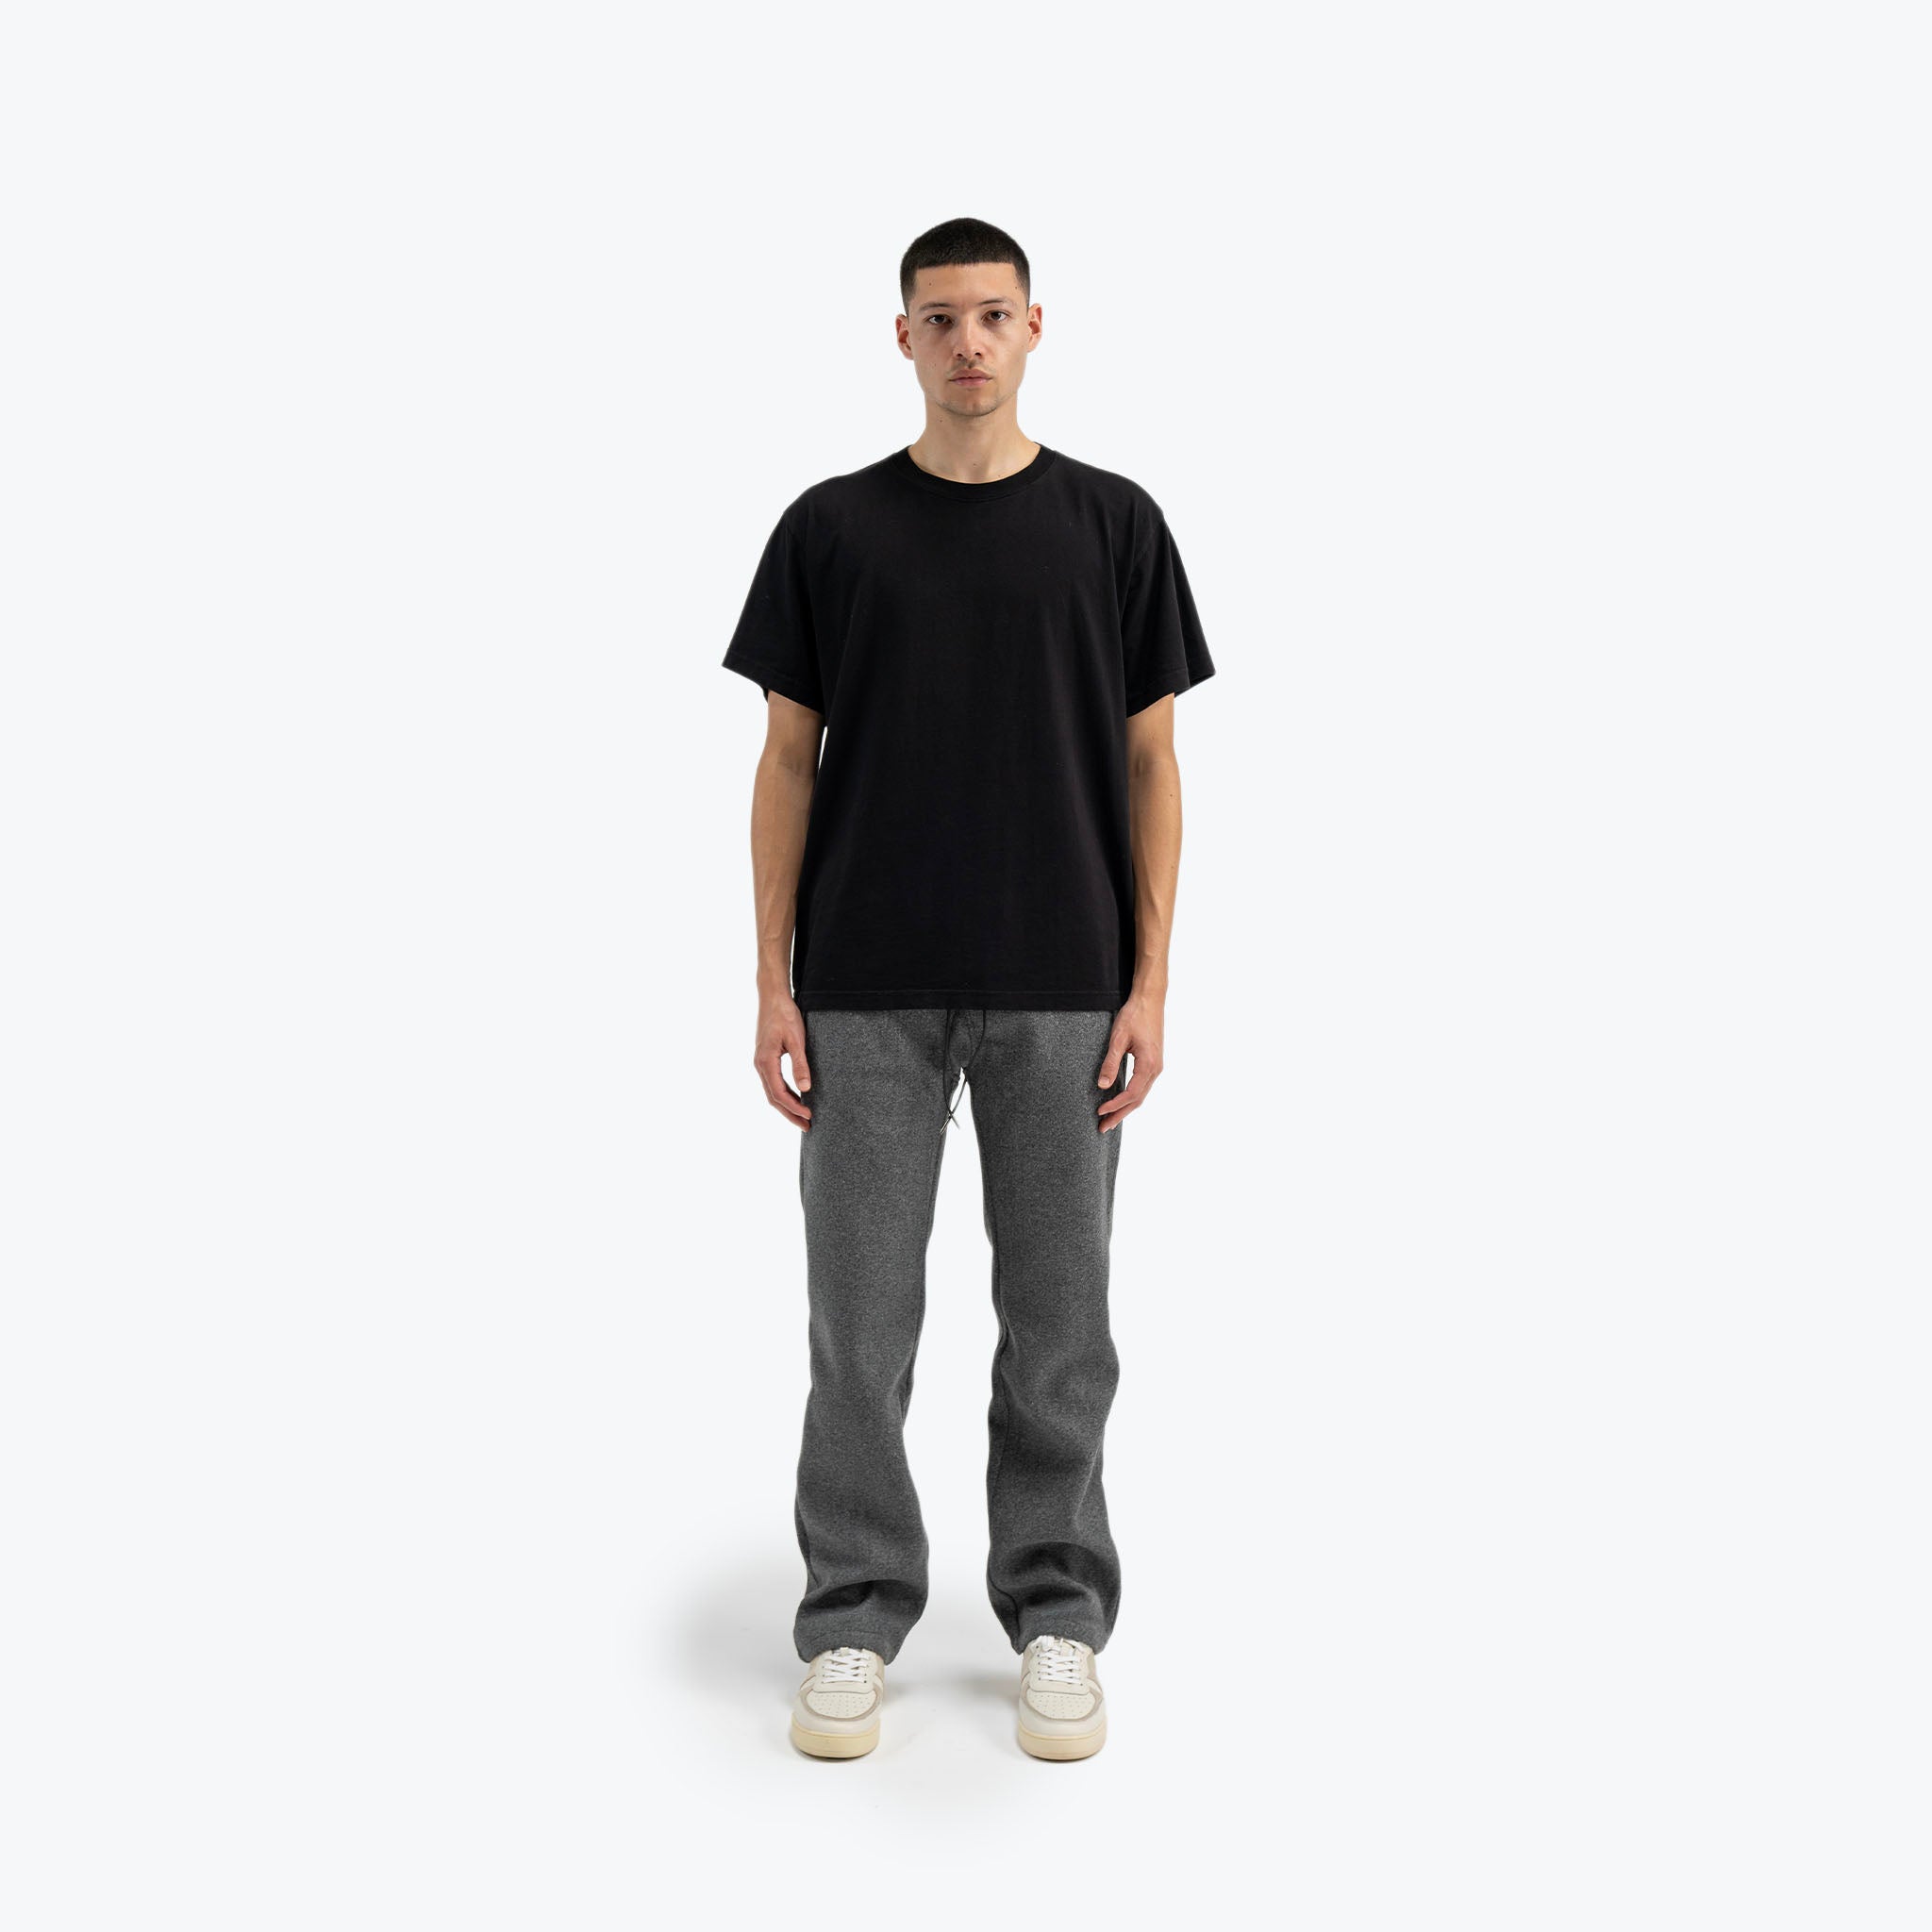 RELAXED FLEECE PANT - HEATHER CHARCOAL GREY – RICHIE LE COLLECTION